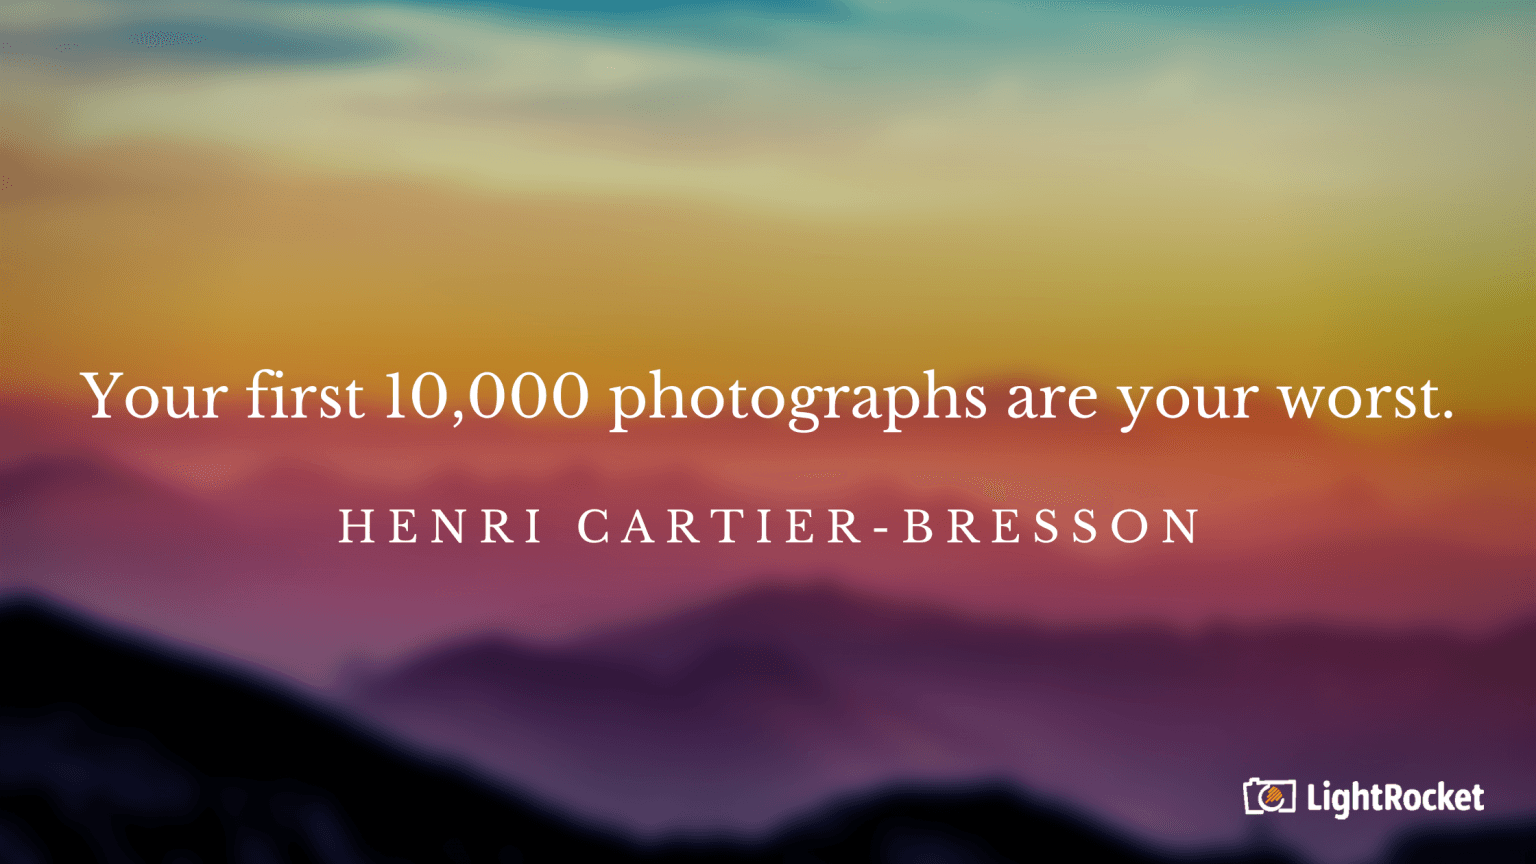 “Your first 10,000 photographs are your worst.” – Henri Cartier-Bresson